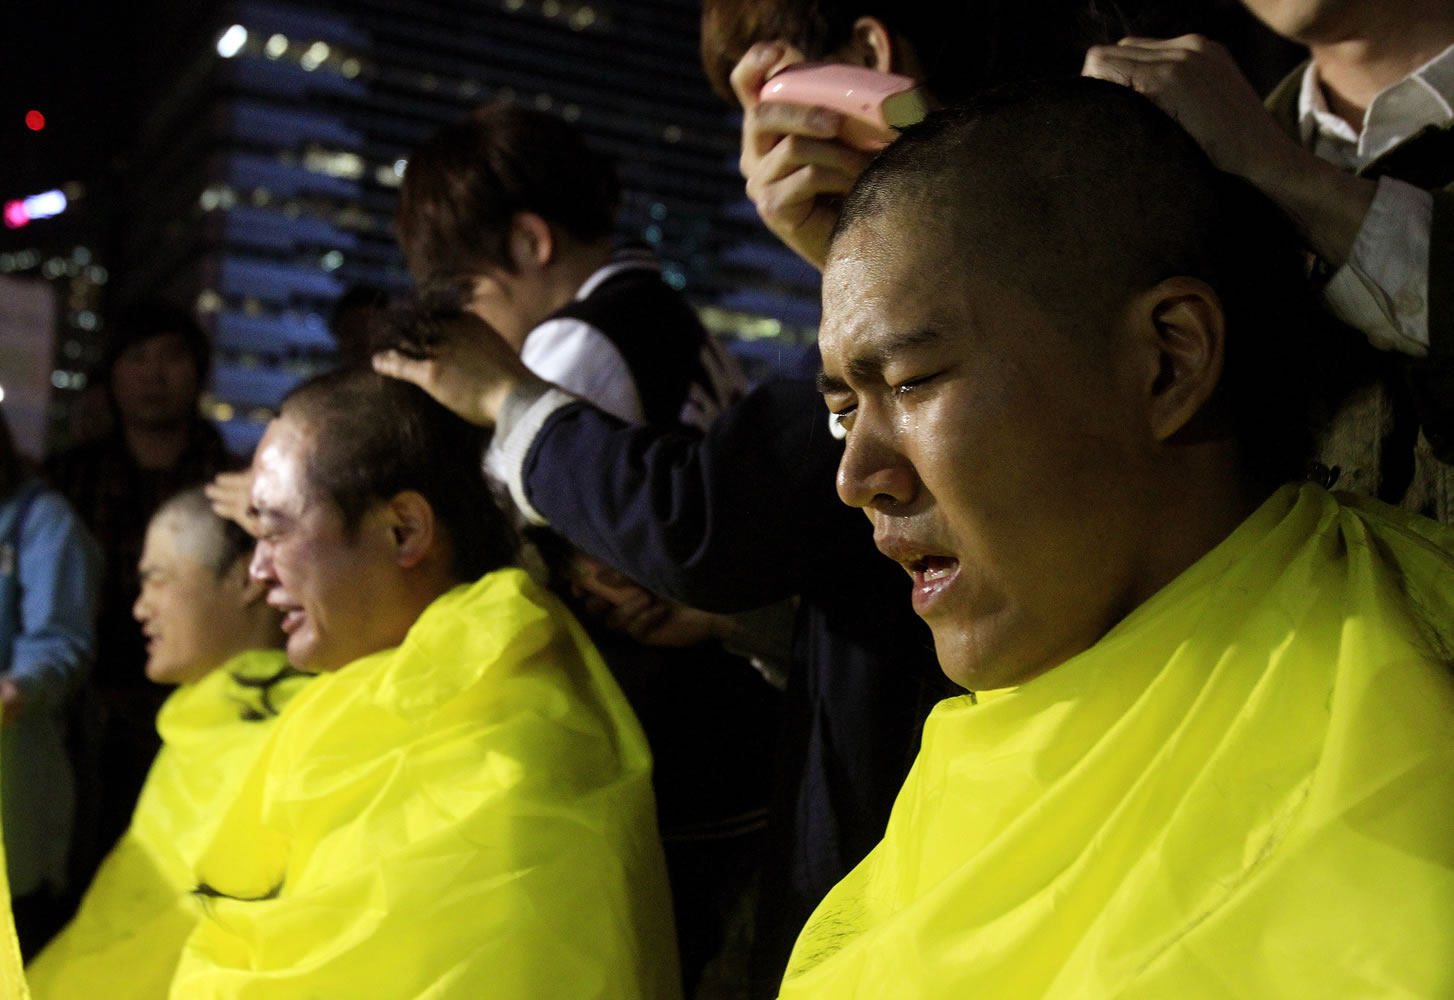 College students have their heads shaved during a rally to call for thorough investigations into the sunken ferry Sewol in Seoul, South Korea, on Thursday.